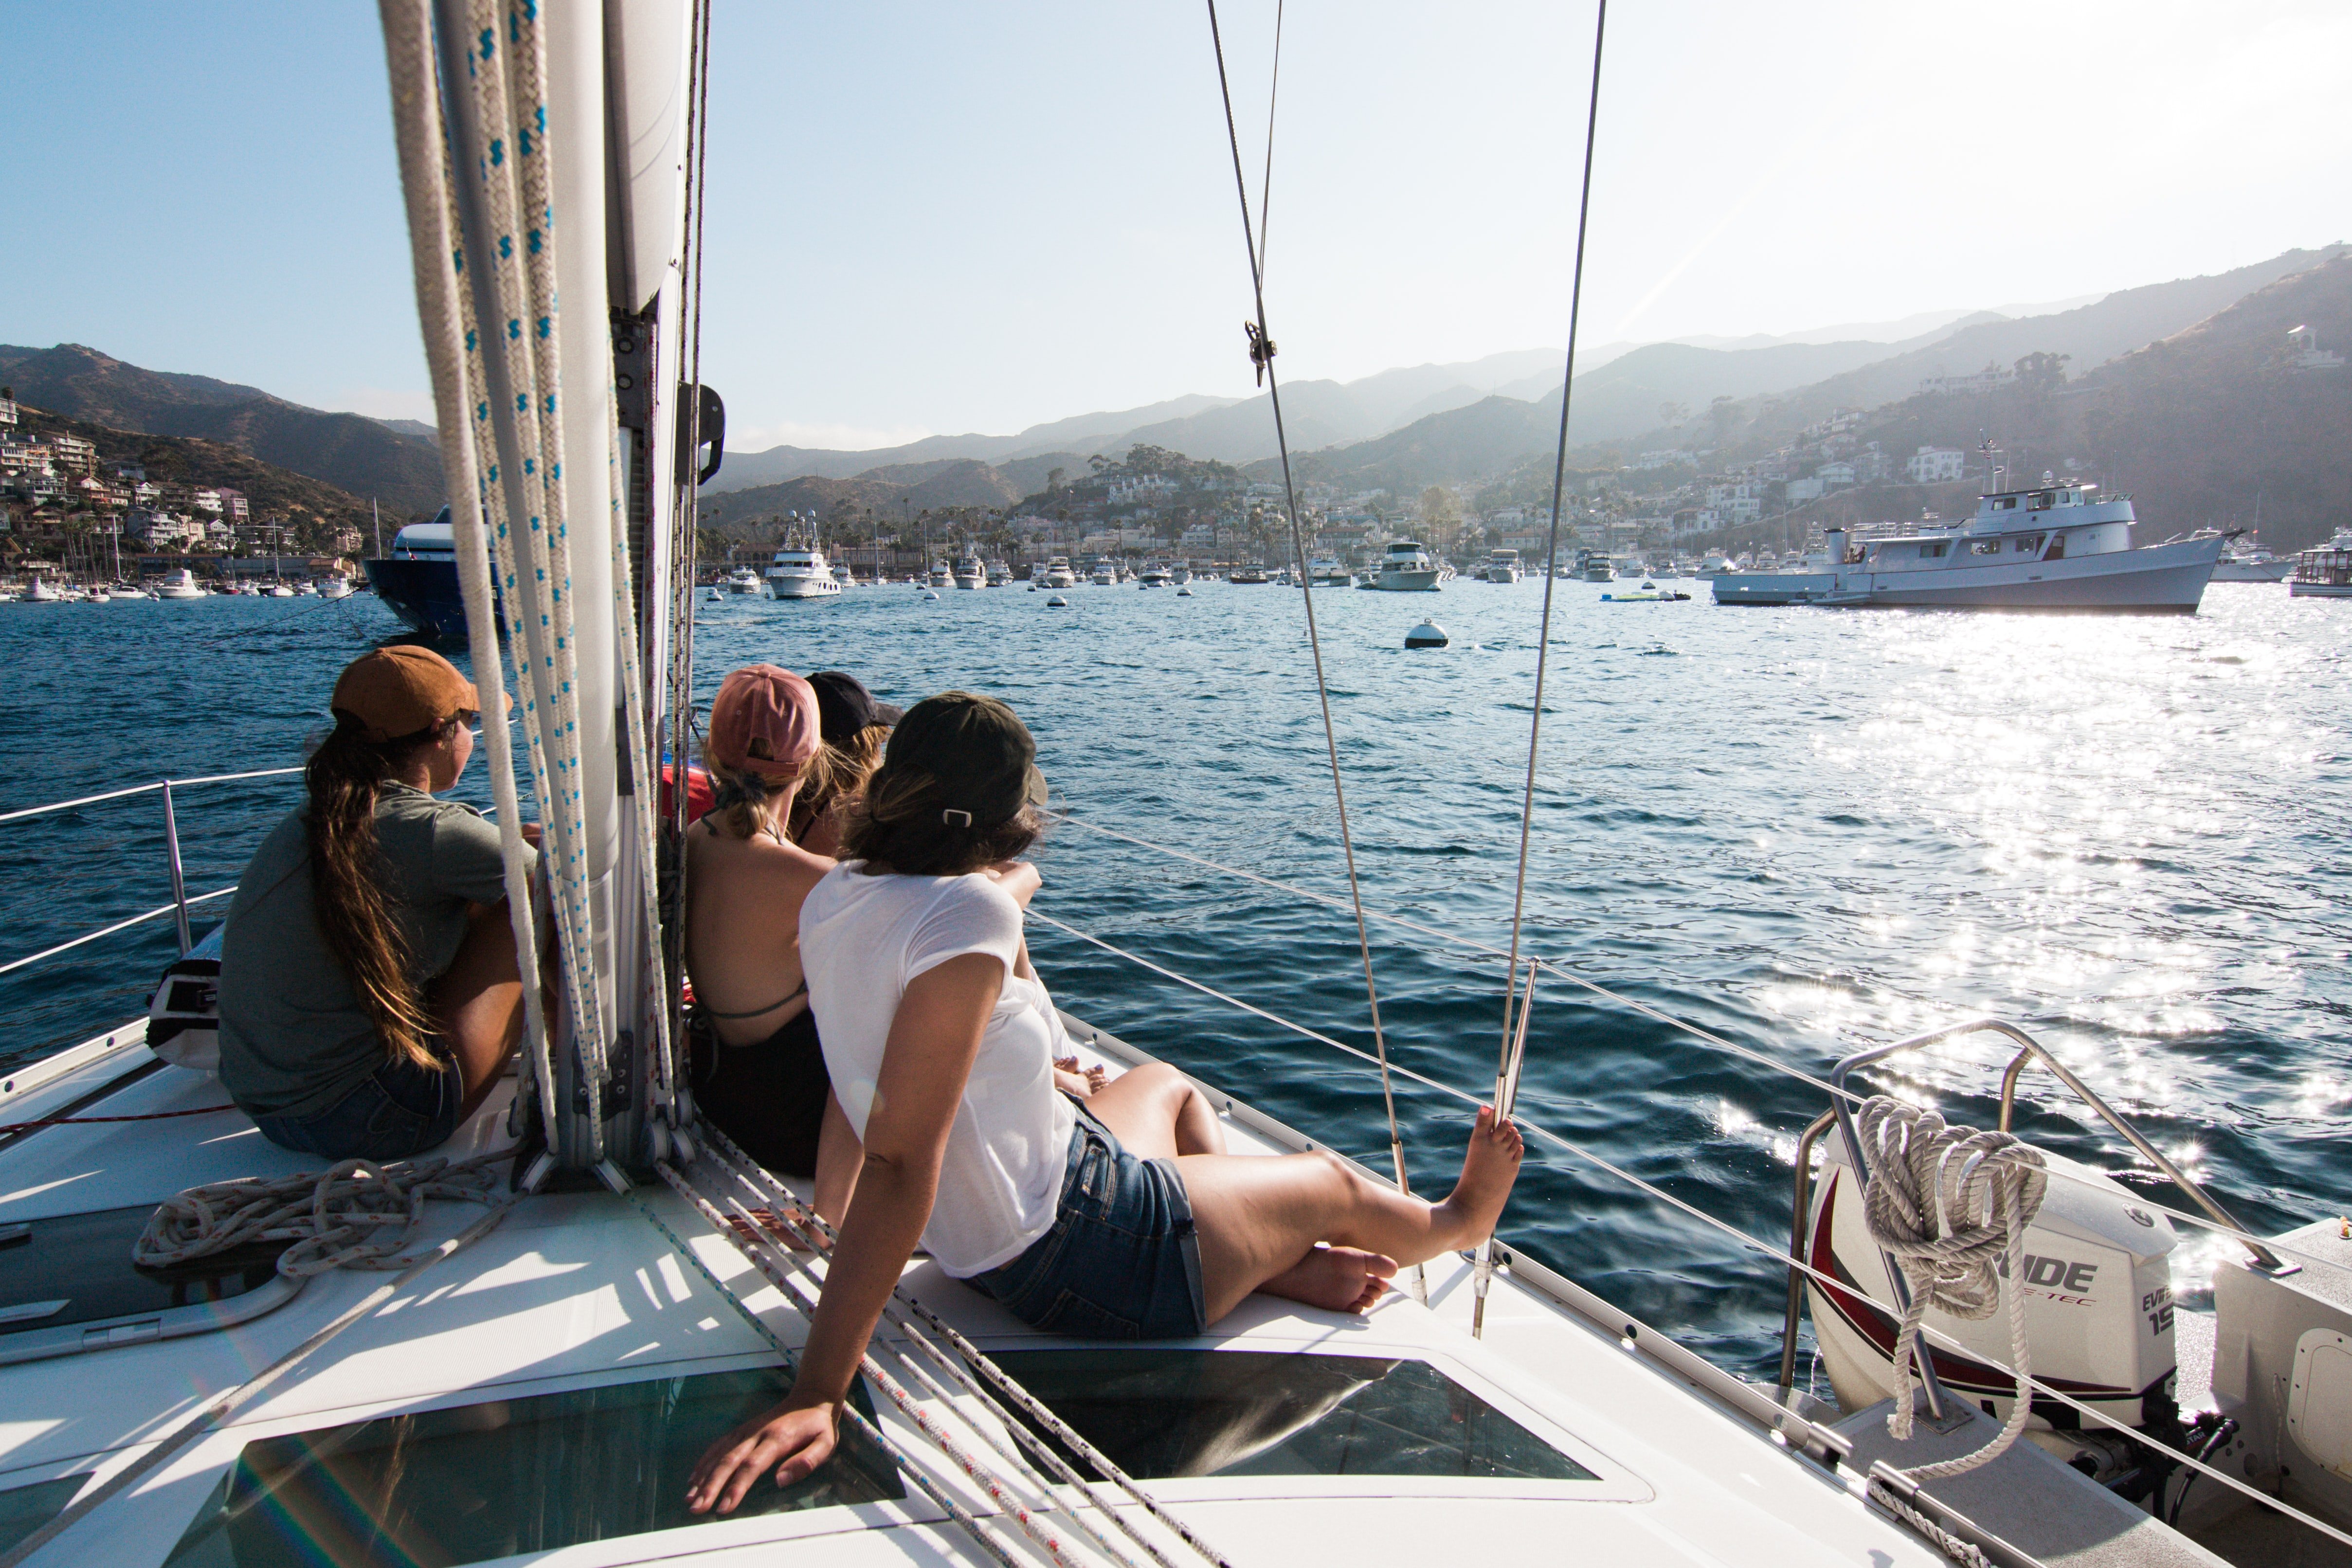 People relaxing on a sailboat in a mountainous scenery. Go on a sailing trip.